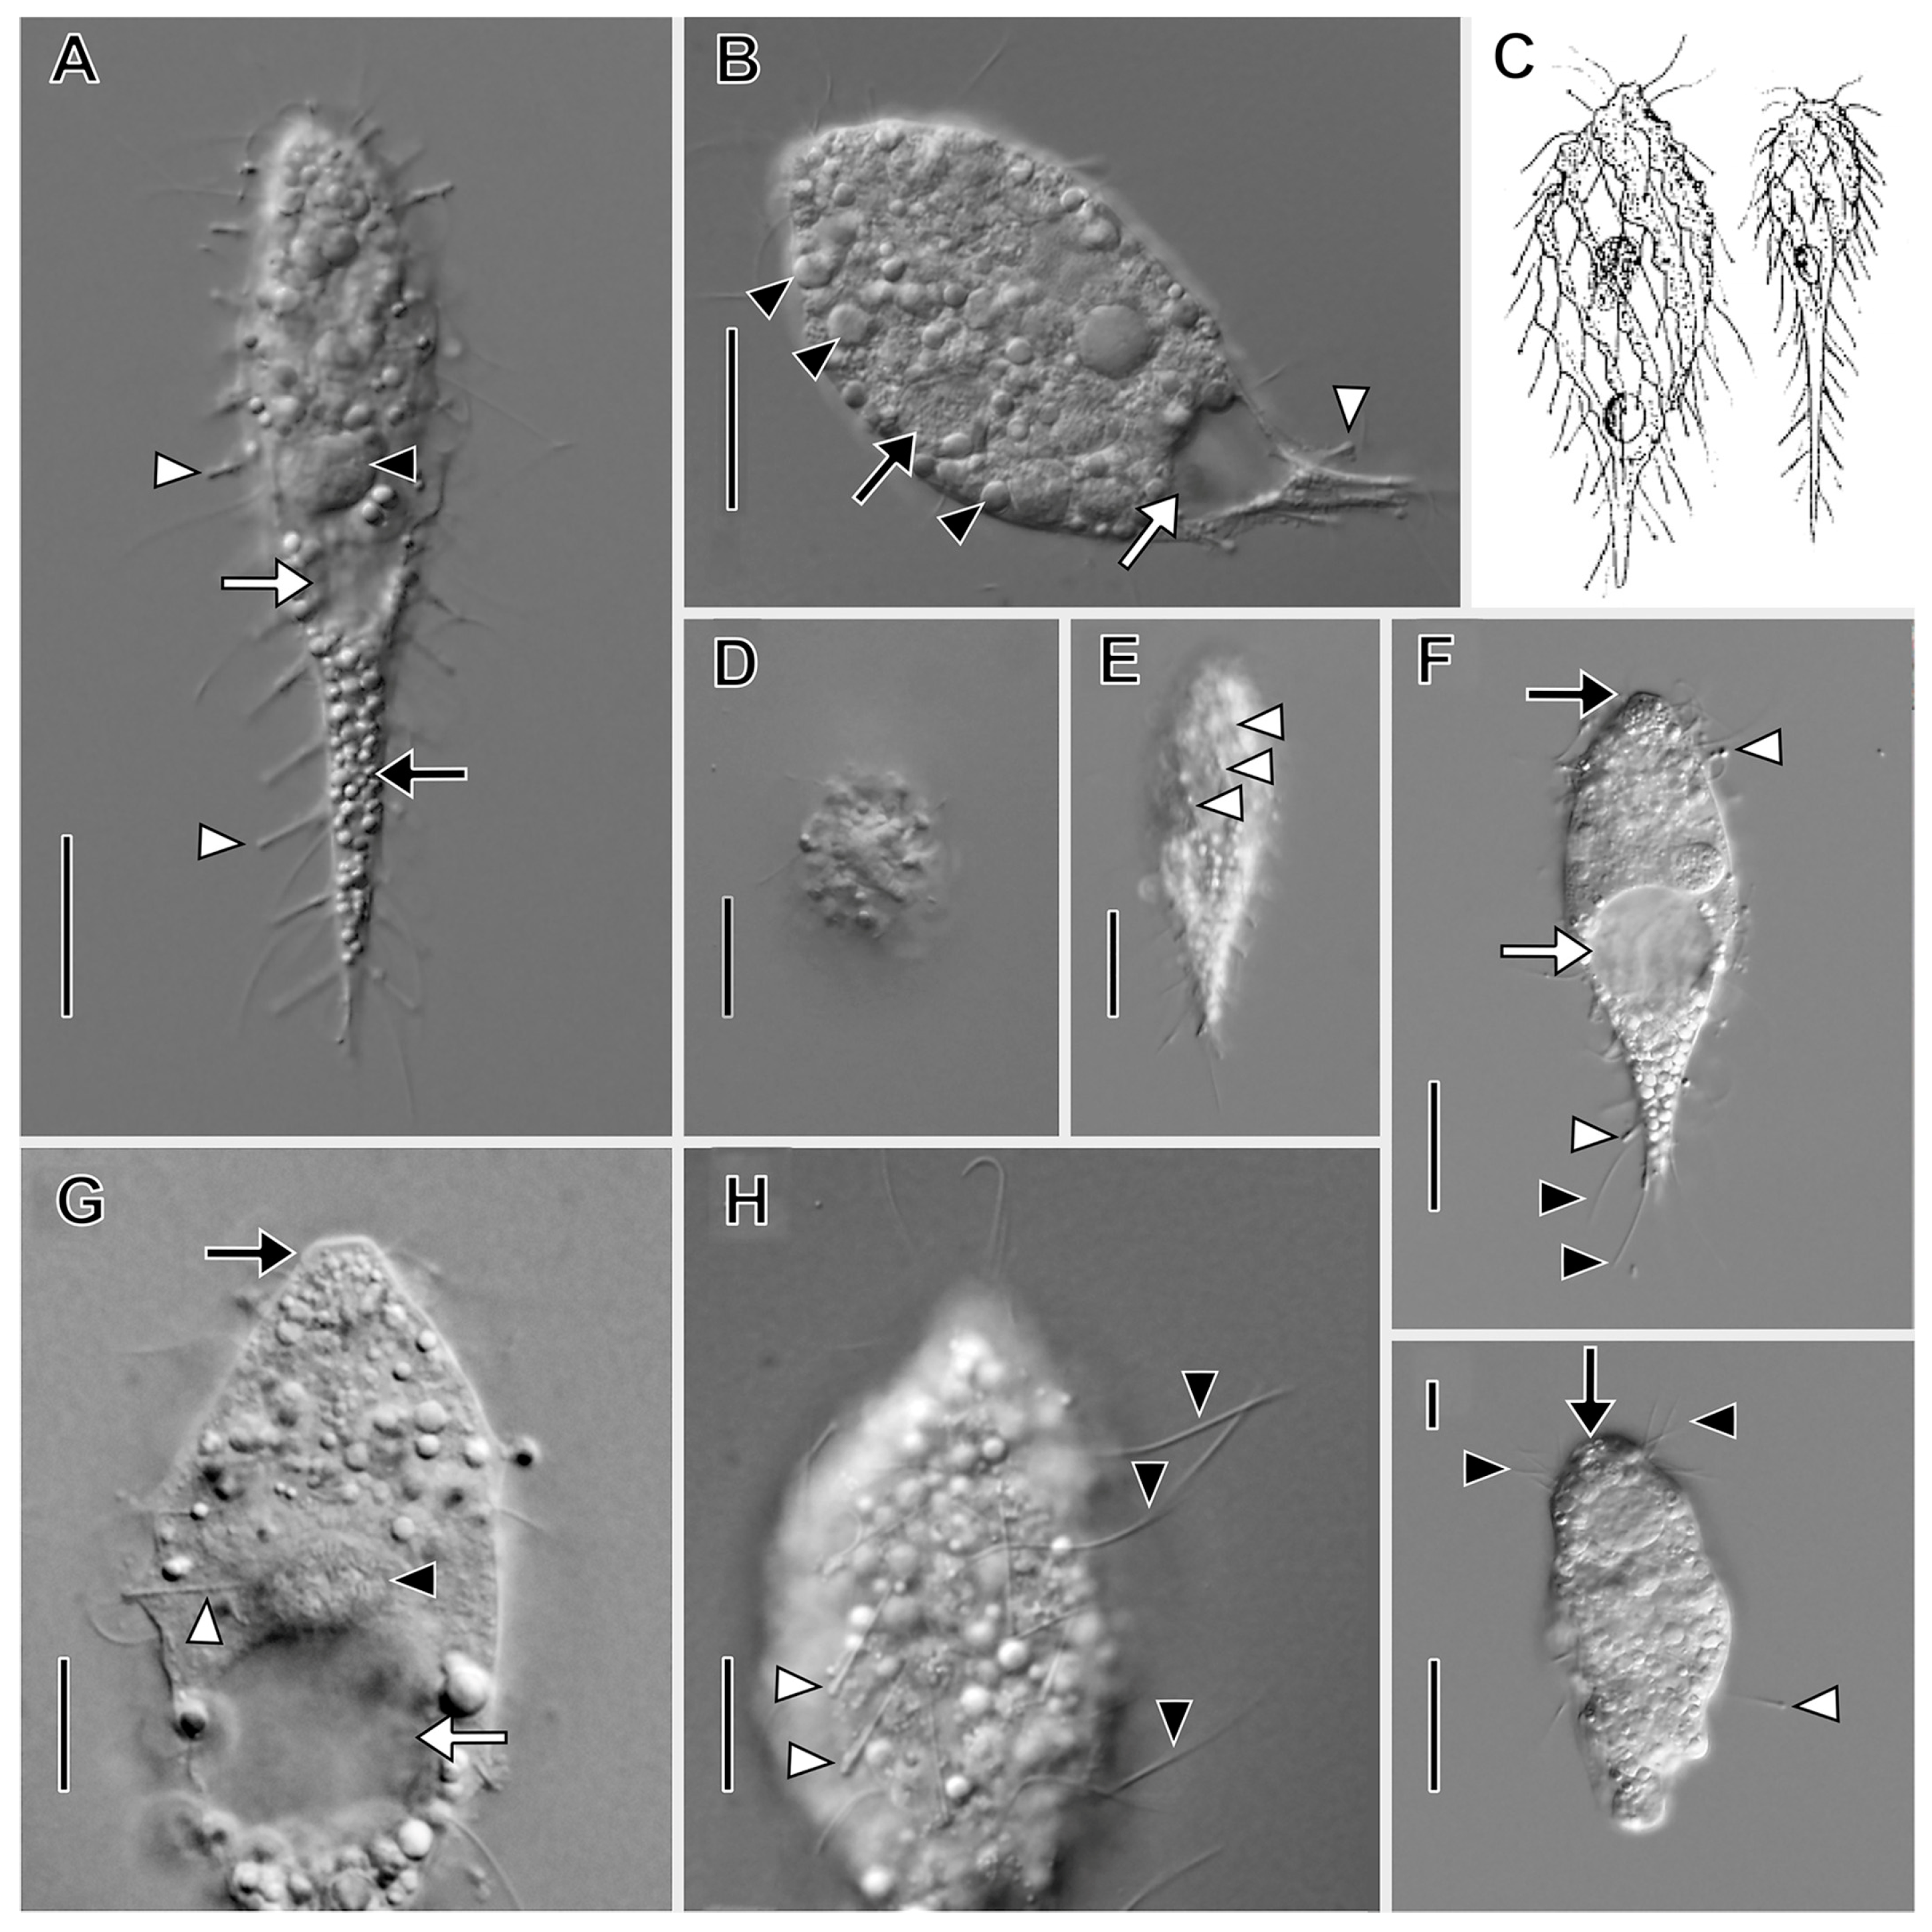 Biology | Free Full-Text | Rediscovery of Remarkably Rare Anaerobic  Tentaculiferous Ciliate Genera Legendrea and Dactylochlamys (Ciliophora:  Litostomatea)